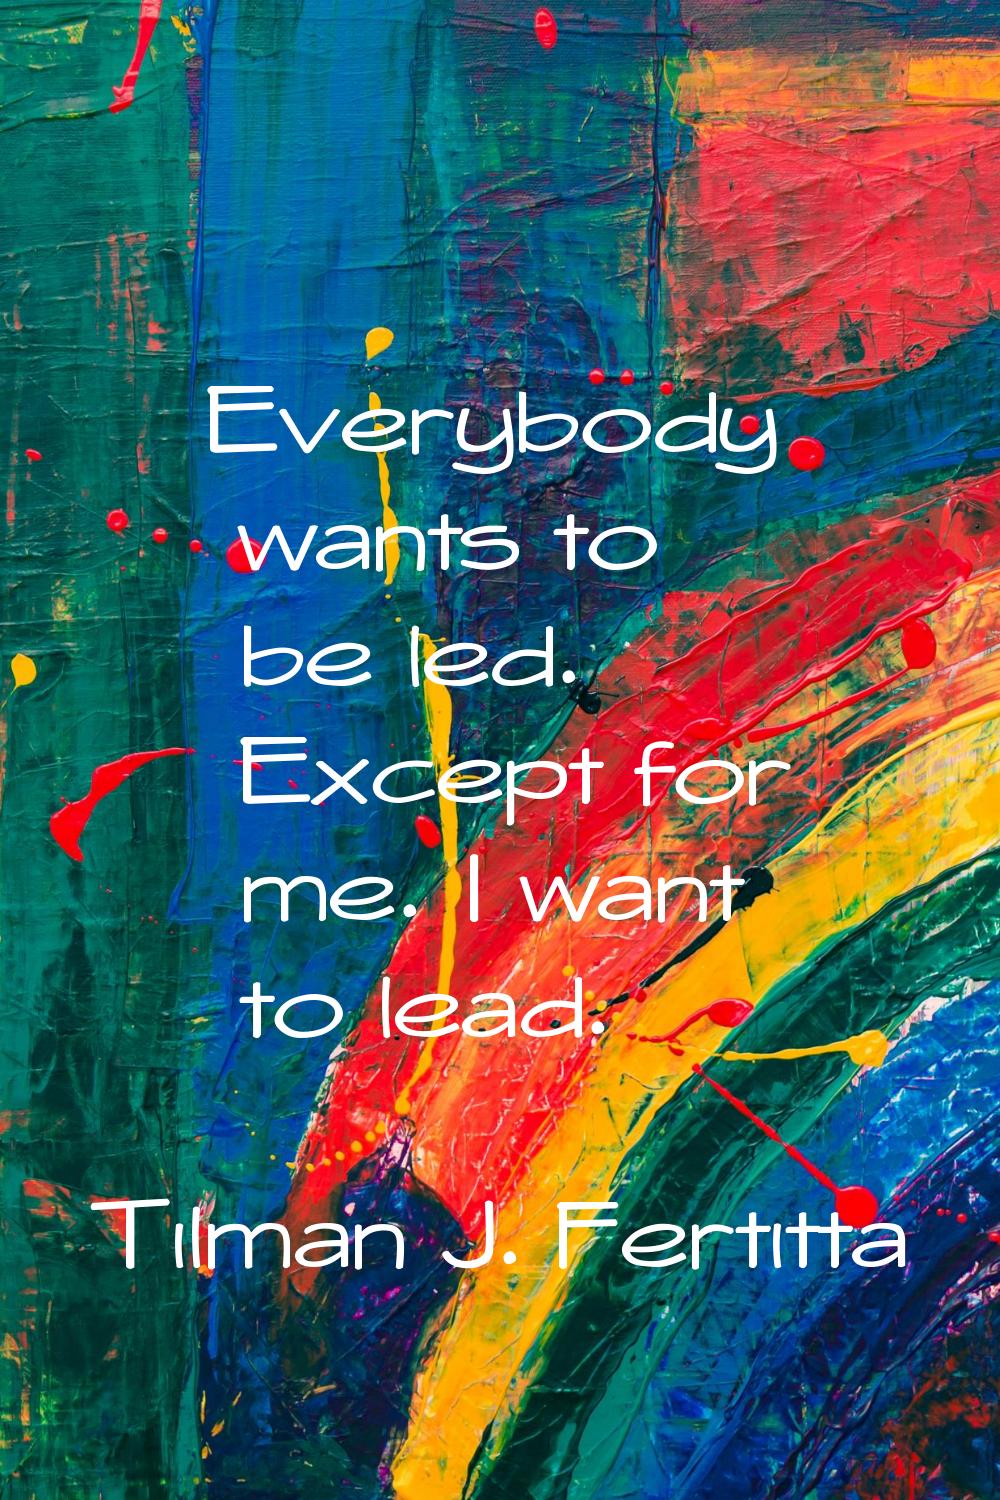 Everybody wants to be led. Except for me. I want to lead.